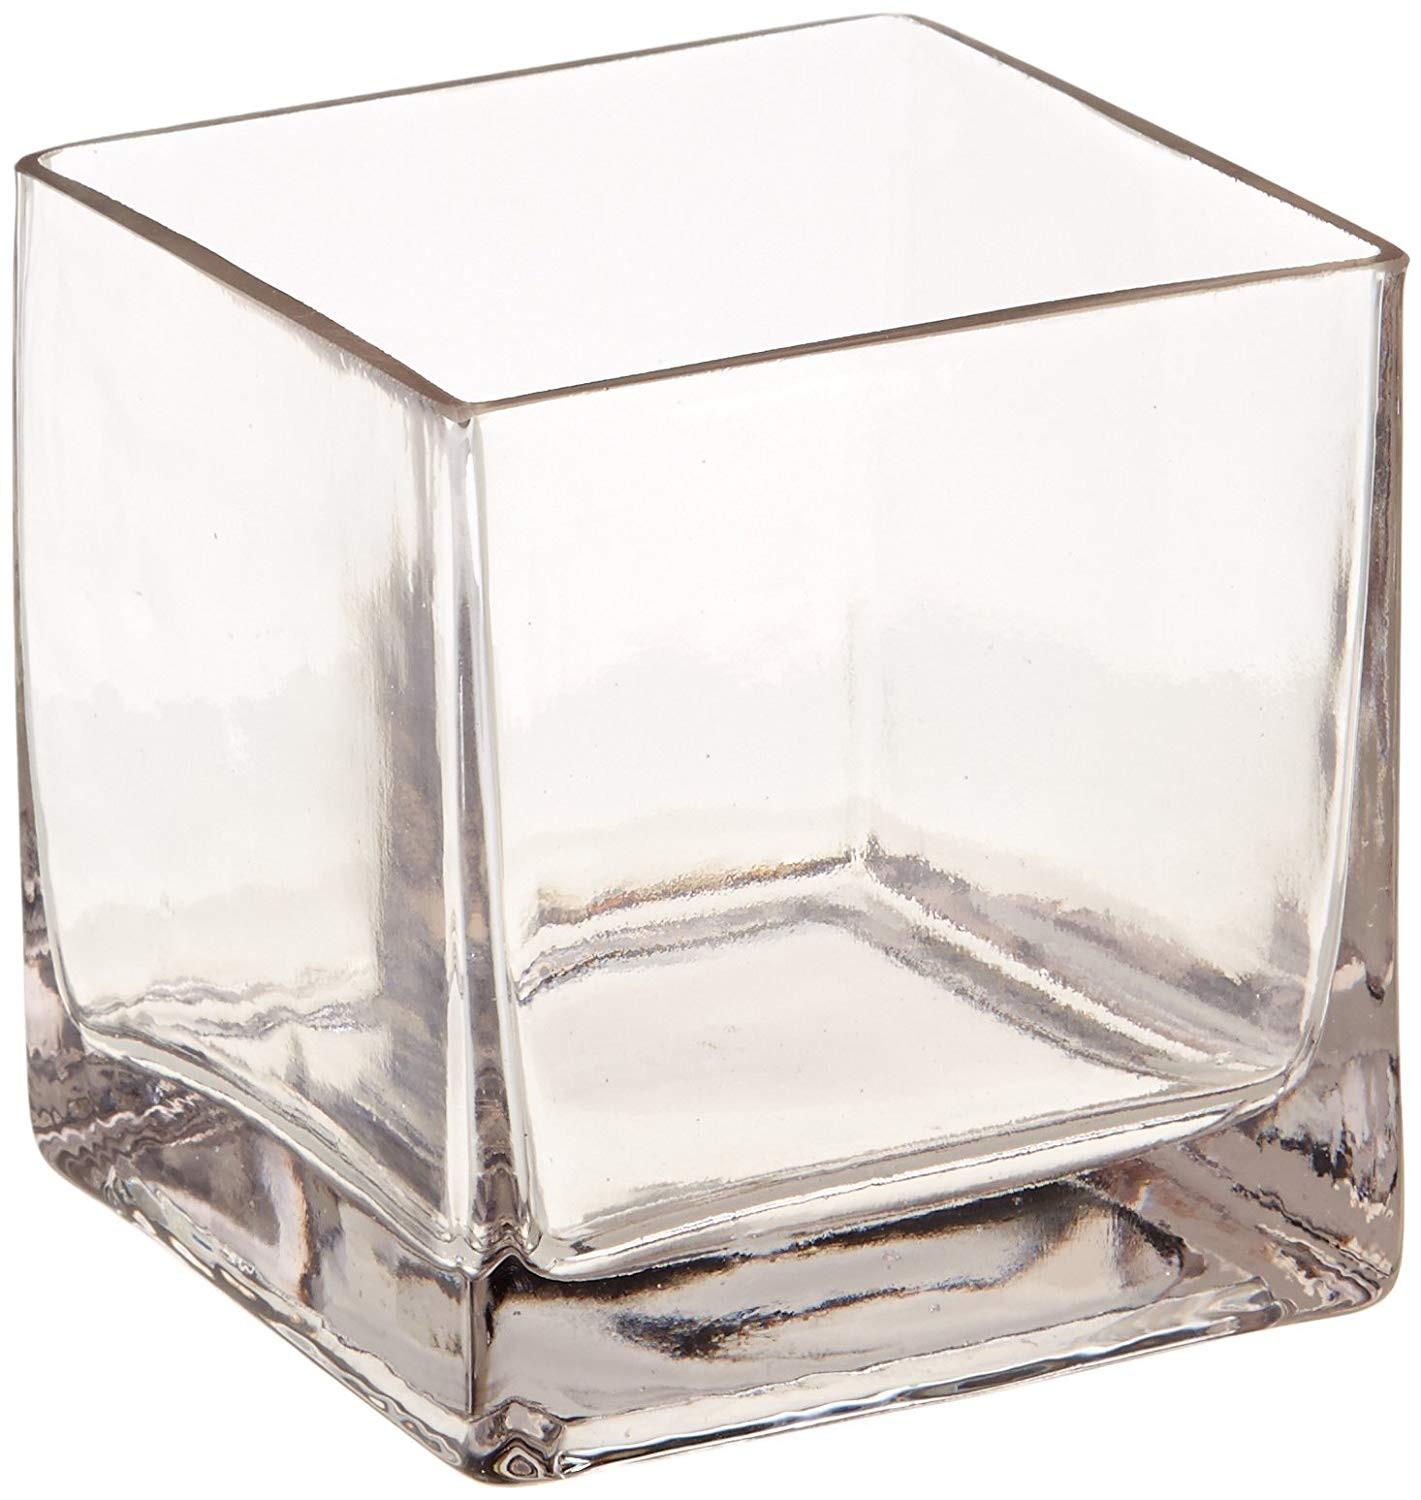 12 Popular Small Glass Cylinder Vases Cheap 2024 free download small glass cylinder vases cheap of amazon com 12piece 4 square crystal clear glass vase home kitchen throughout 71 jezfmvnl sl1500